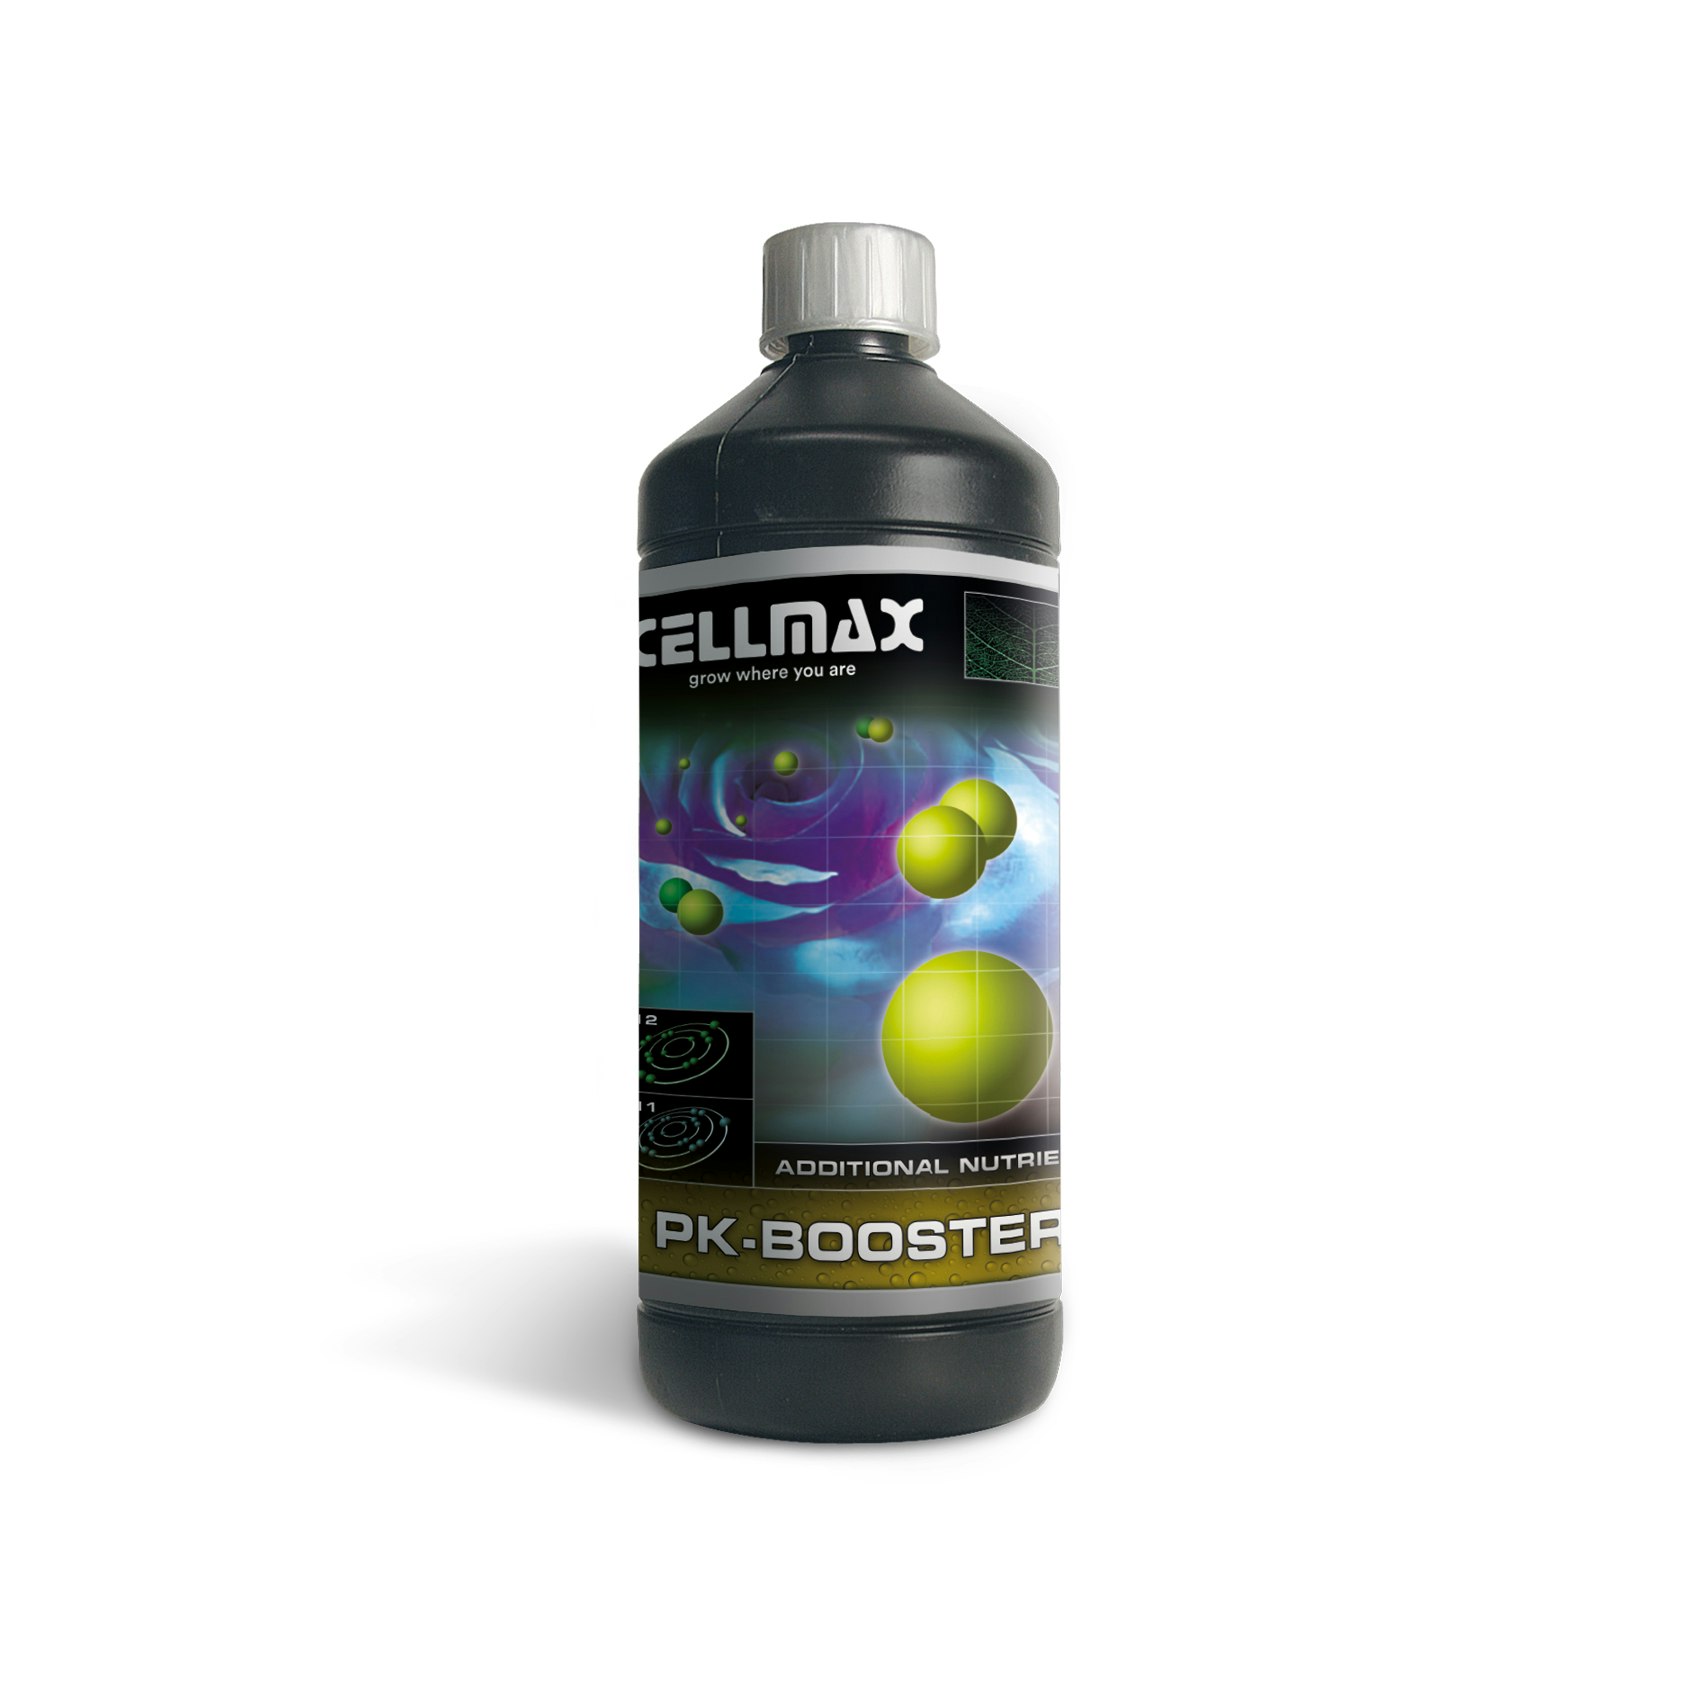 Hydro - Cellmax Complete Package